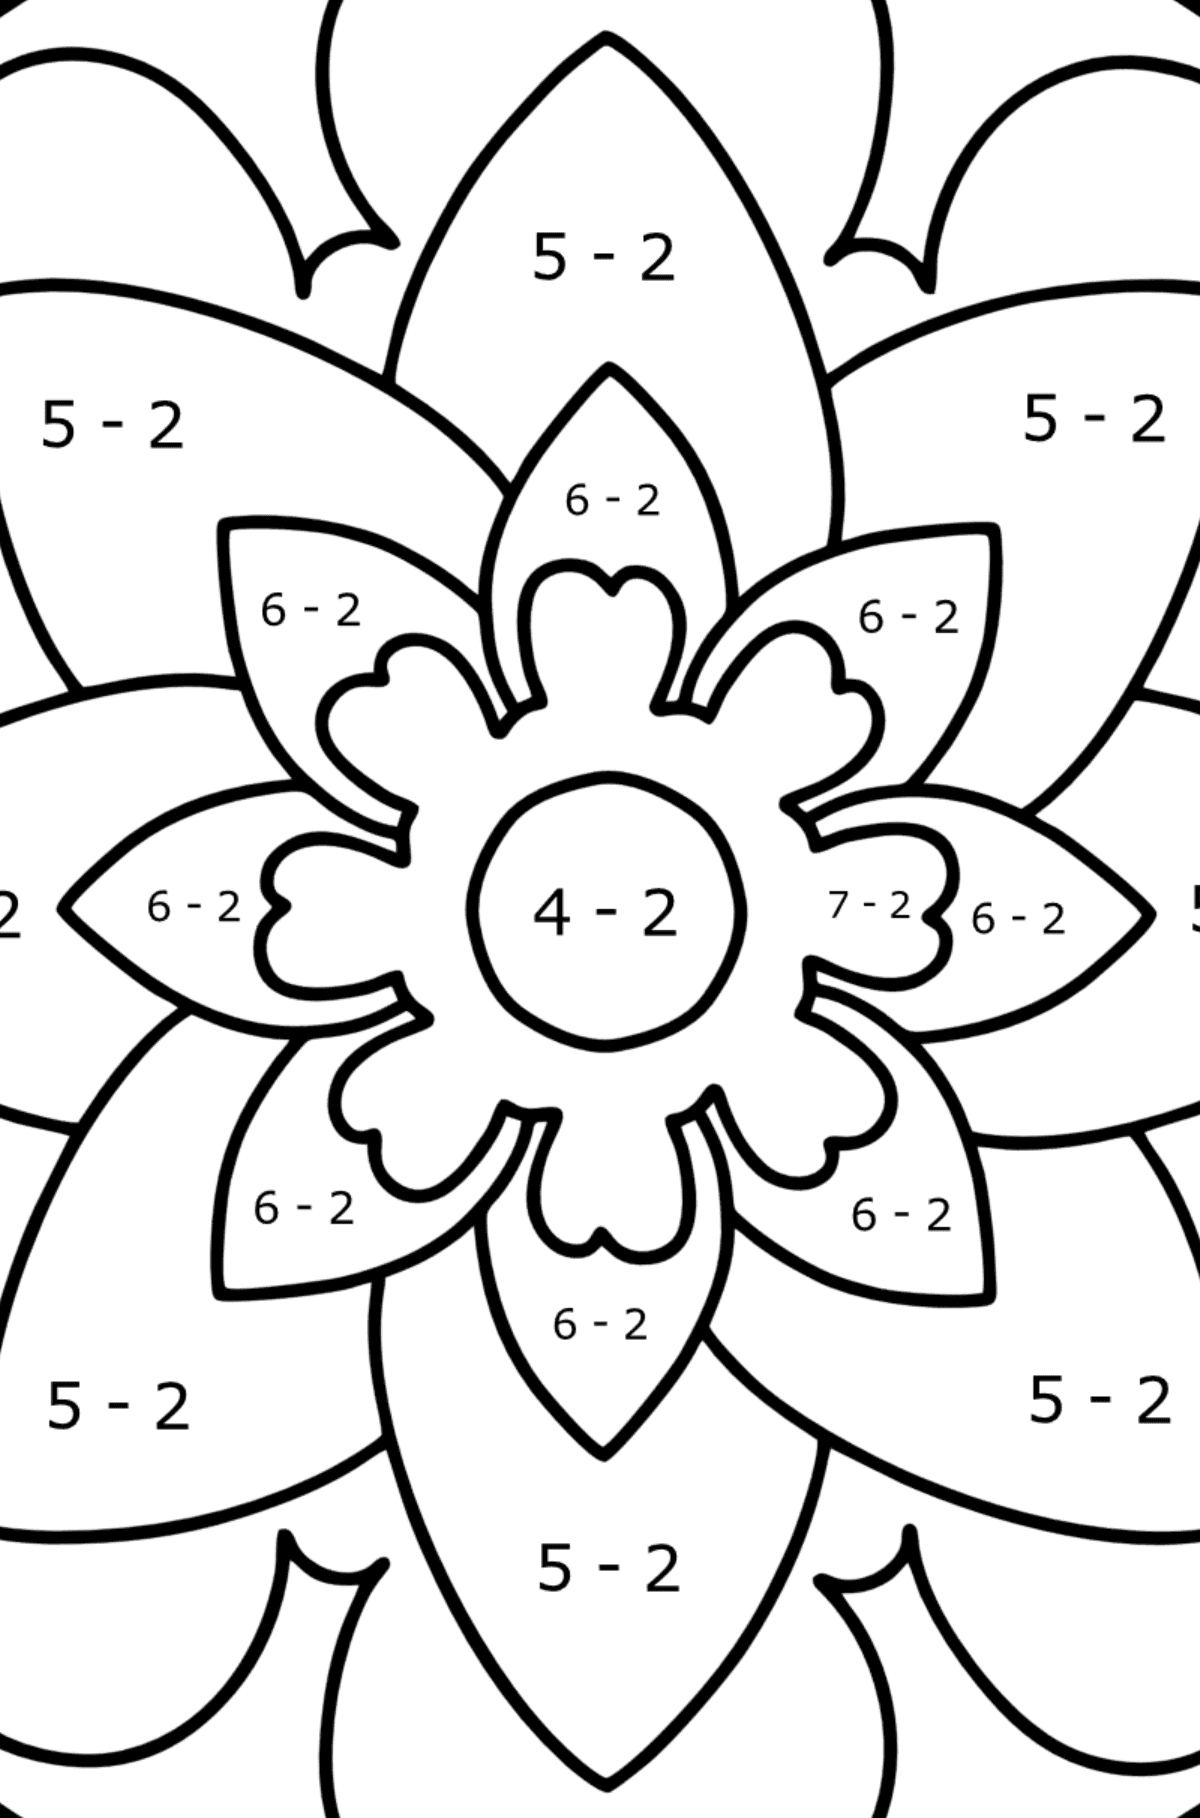 Mandala coloring page - 20 elements - Math Coloring - Subtraction for Kids